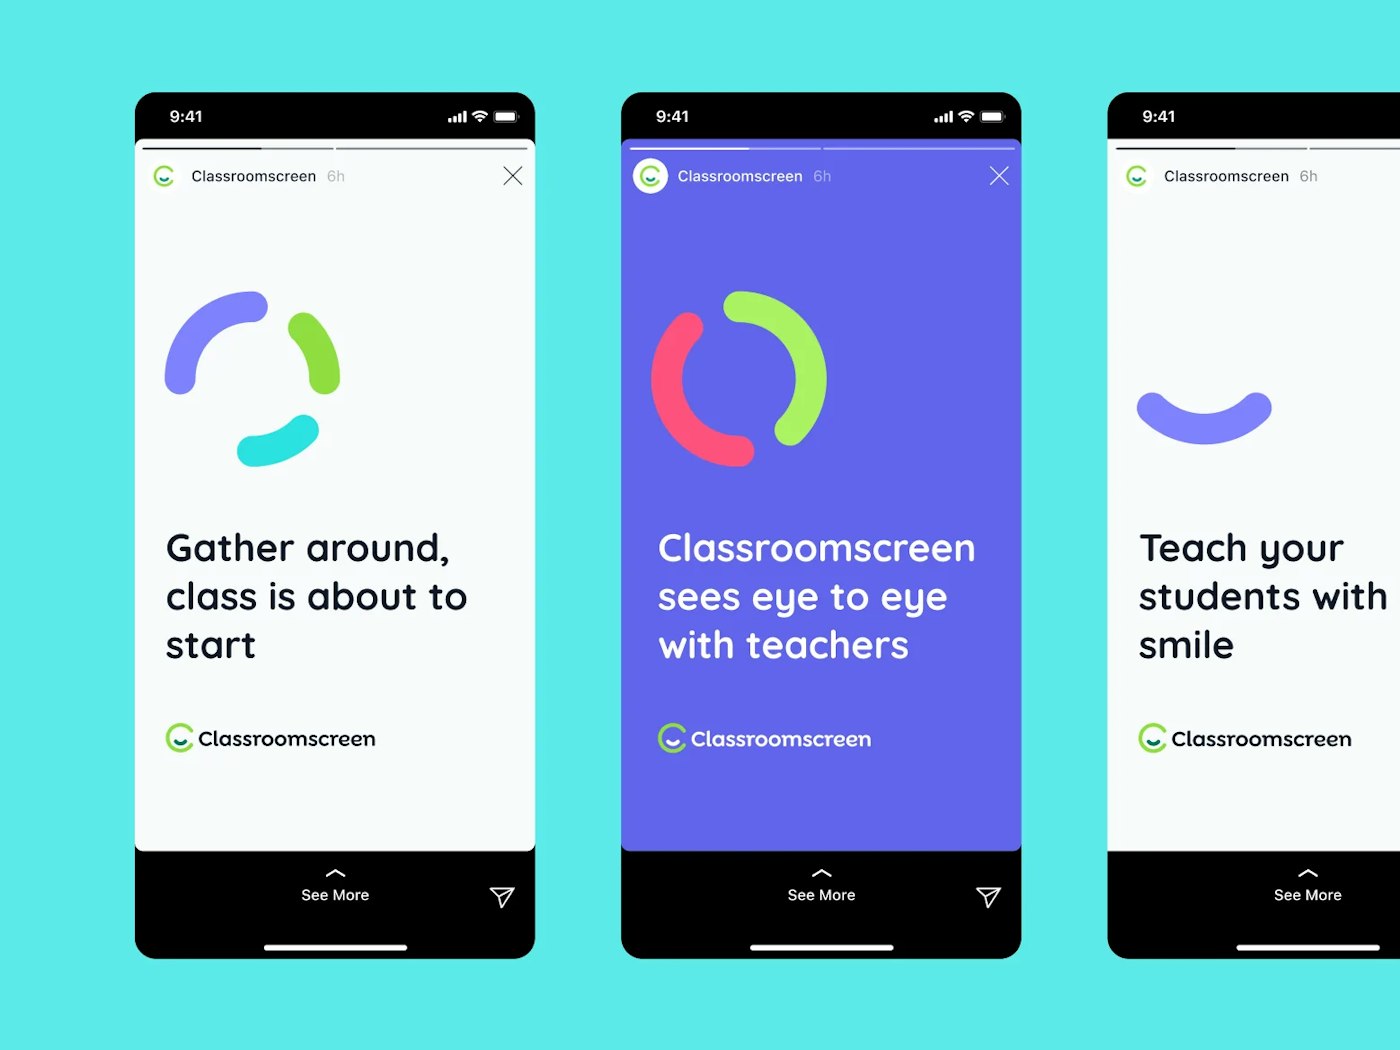 Three mobile phone shaped images that each show an Instagram story-like interface with a social post design for Classroomscreen